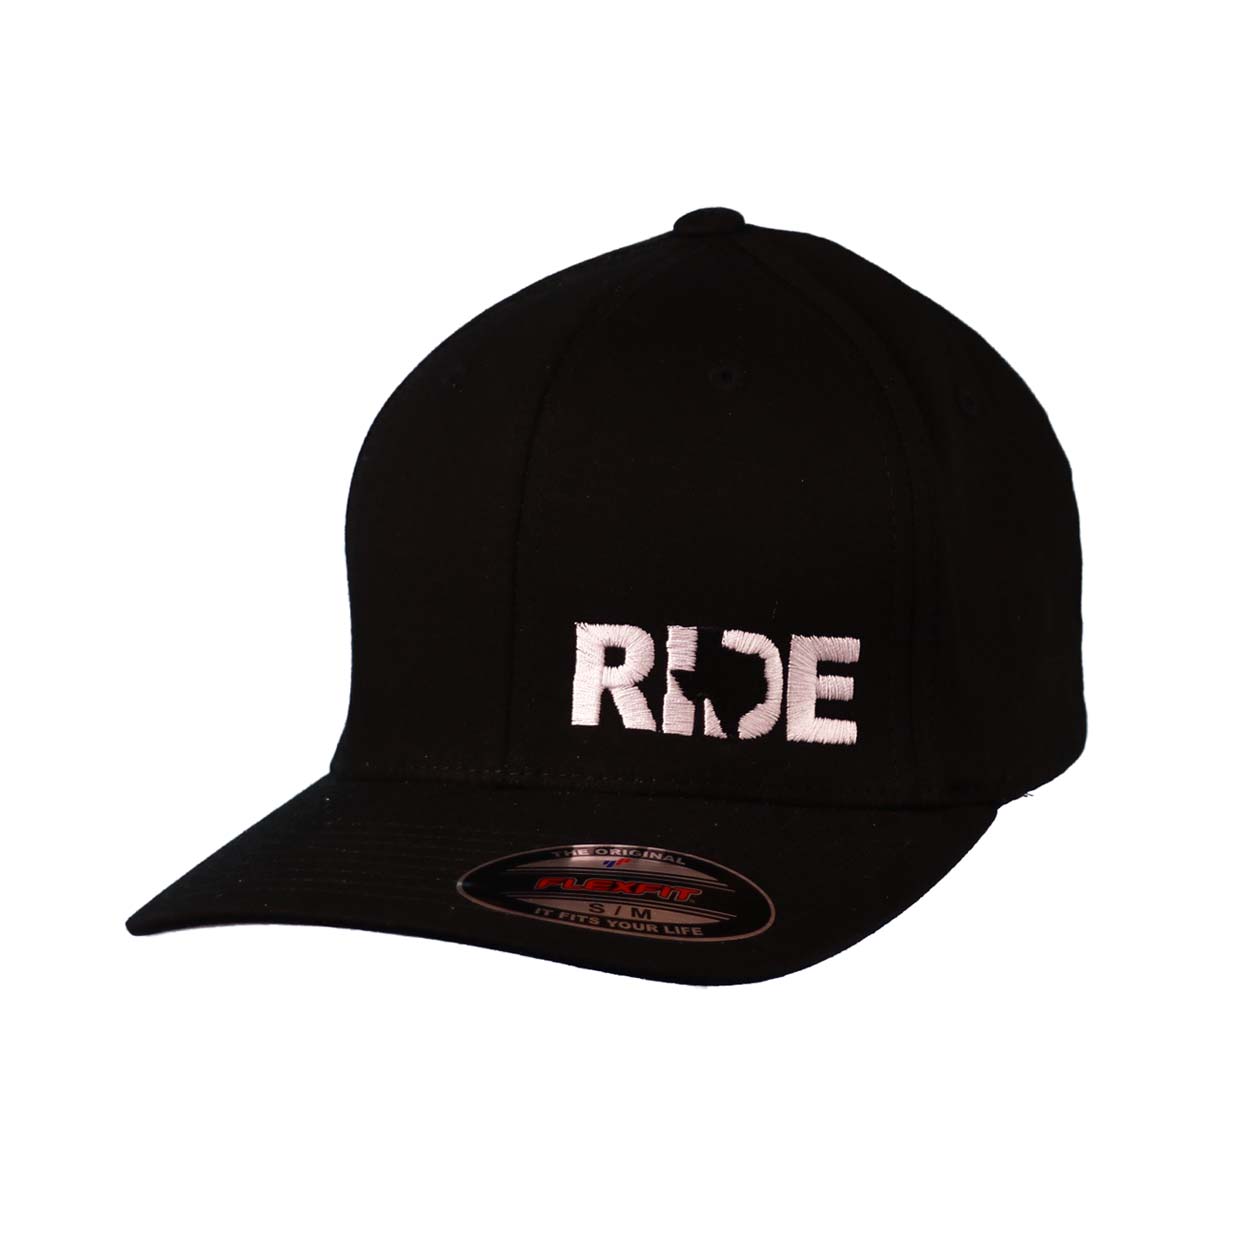 Ride Texas Night Out Embroidered Flex Fit Hat Black/White